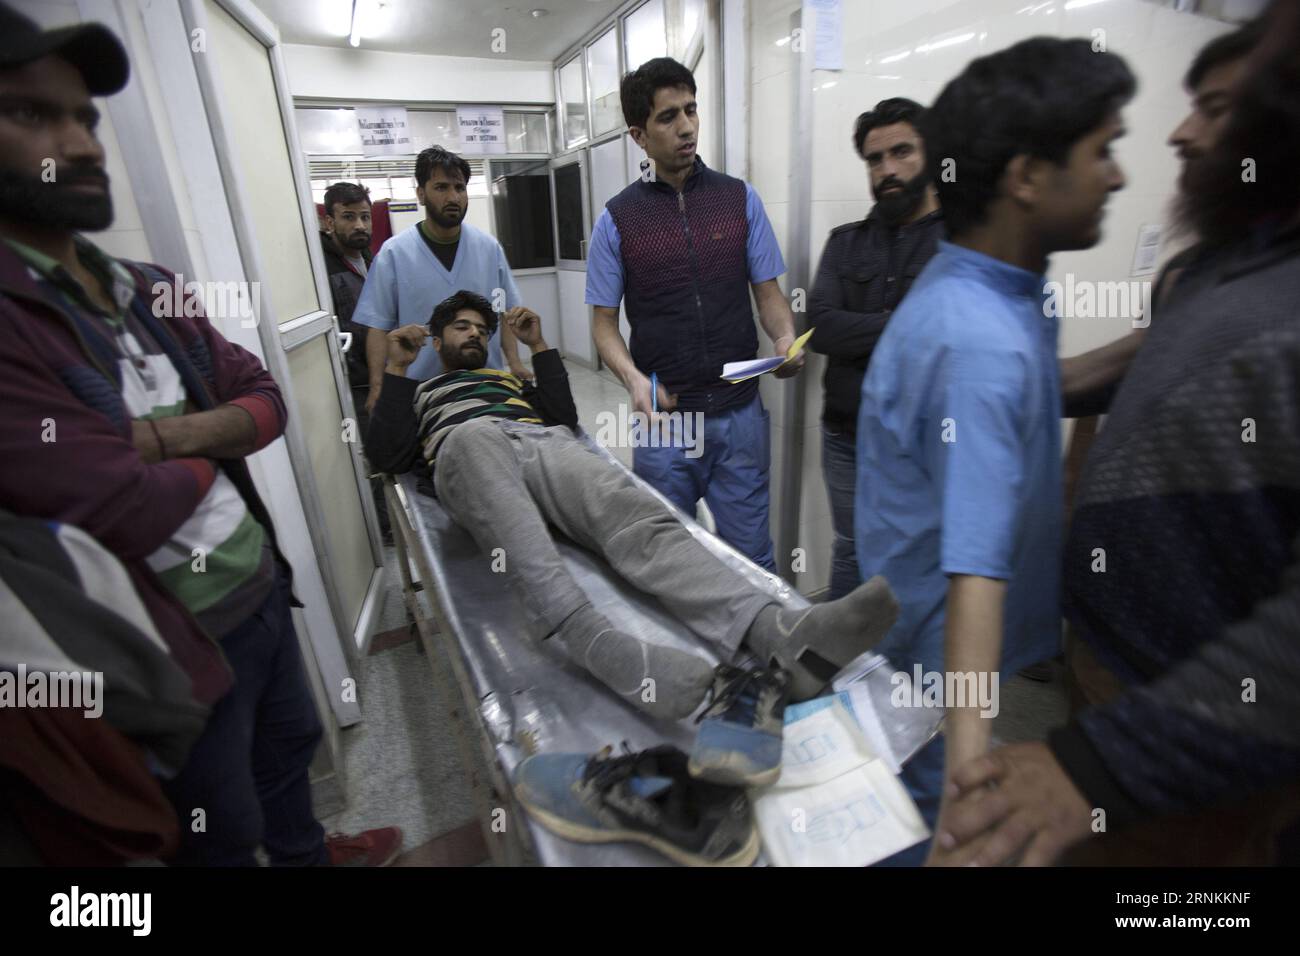 (170409) -- SRINAGAR, April 9, 2017 -- Paramedics transfer a wounded person inside a hospital in Srinagar, summer capital of Indian-controlled Kashmir, April 9, 2017. At least three persons were killed and several others injured on Sunday when Indian security forces opened fire on a stone-pelting mob that stormed a polling station in Indian-controlled Kashmir s parliamentary constituency of Srinagar. )(rh) KASHMIR-SRINAGAR-POLITICS JavedxDar PUBLICATIONxNOTxINxCHN   Srinagar April 9 2017 Paramedics Transfer a Wounded Person Inside a Hospital in Srinagar Summer Capital of Indian Controlled Kash Stock Photo